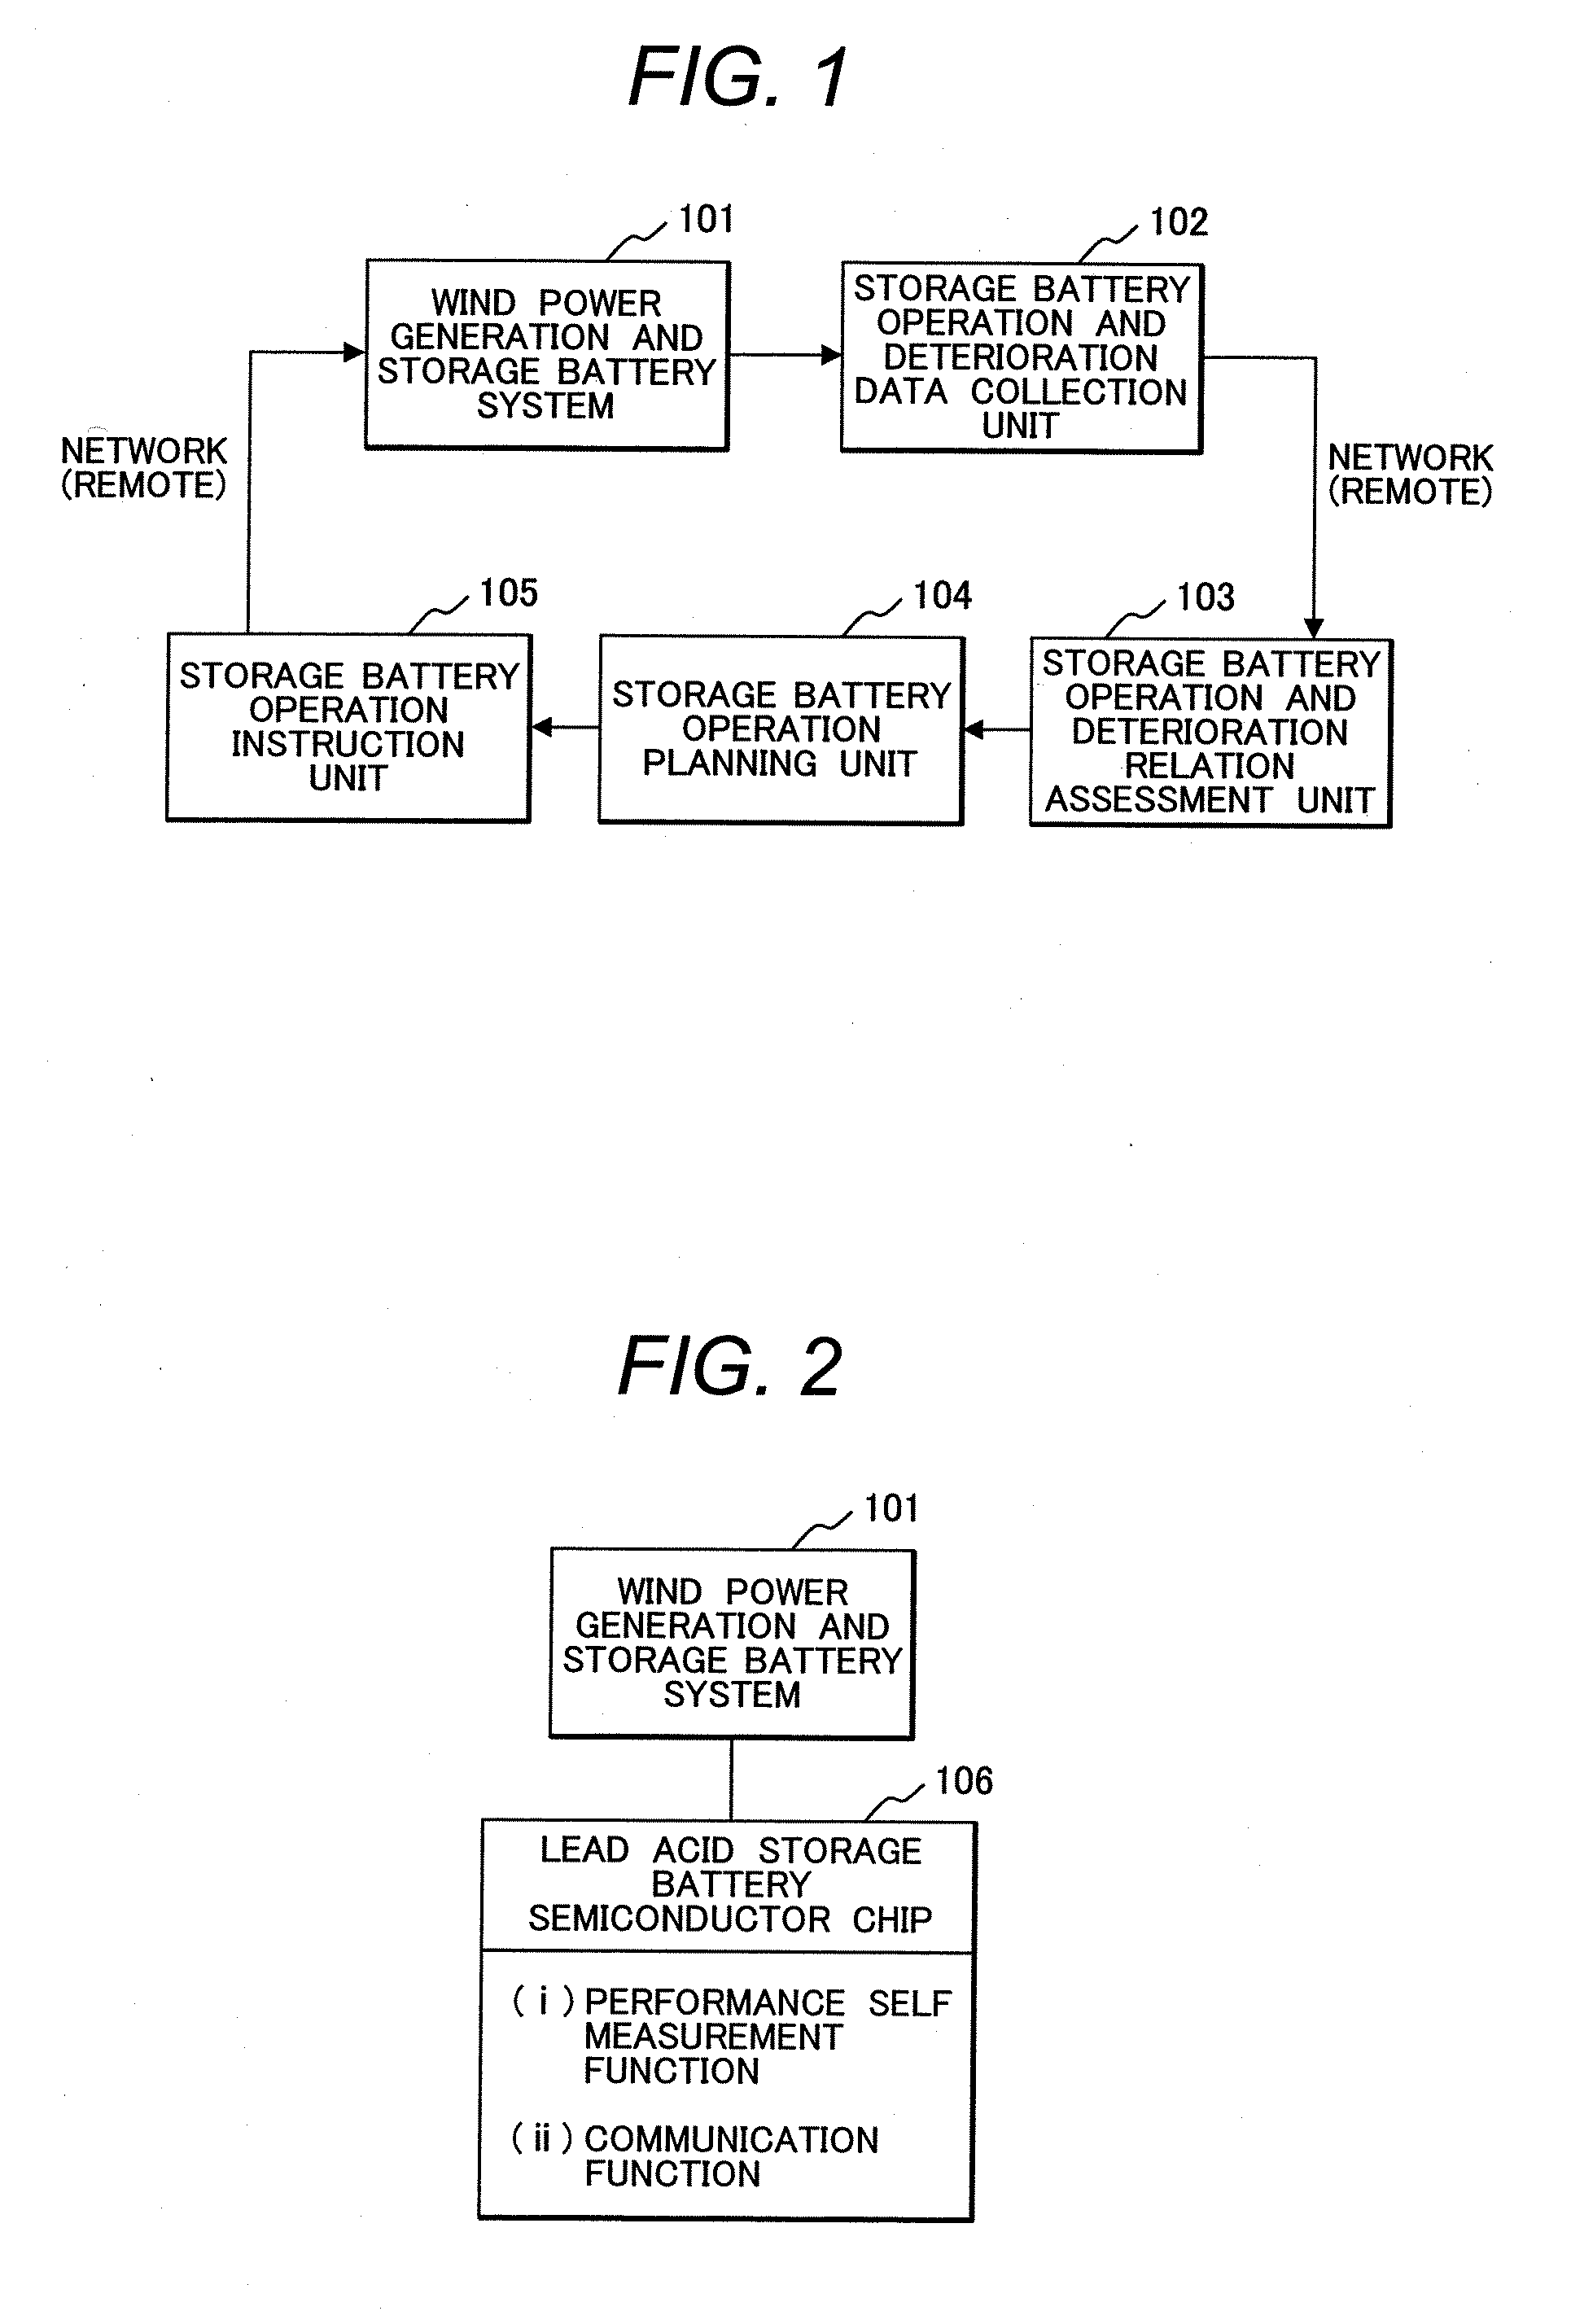 System for control of wind power generation storage battery and method of control thereof